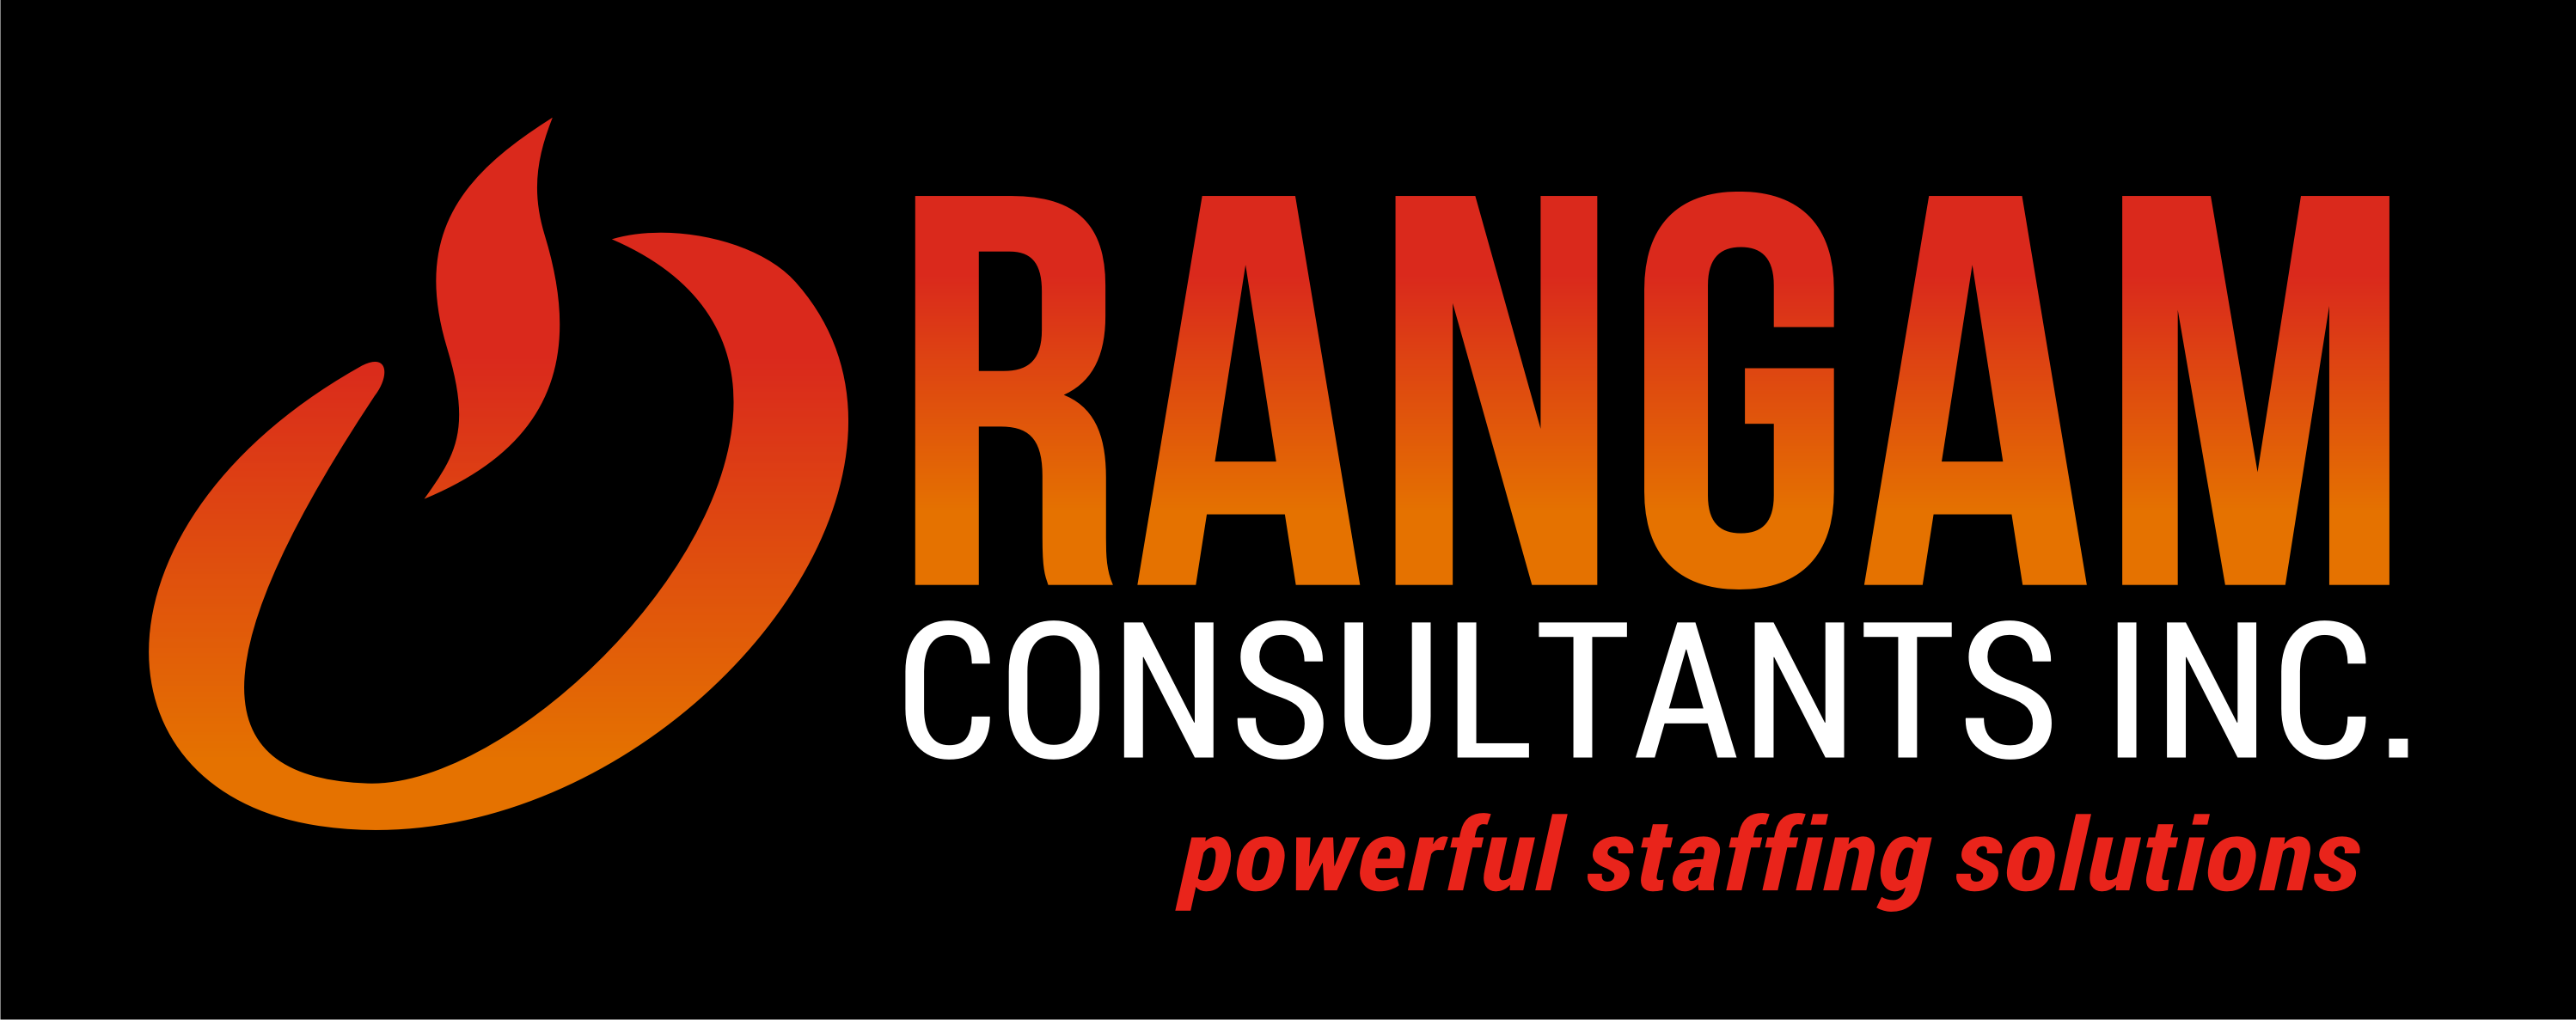 Rangam Consultants Inc., WebTeam's parent company, has been providing professional staffing services since 1995